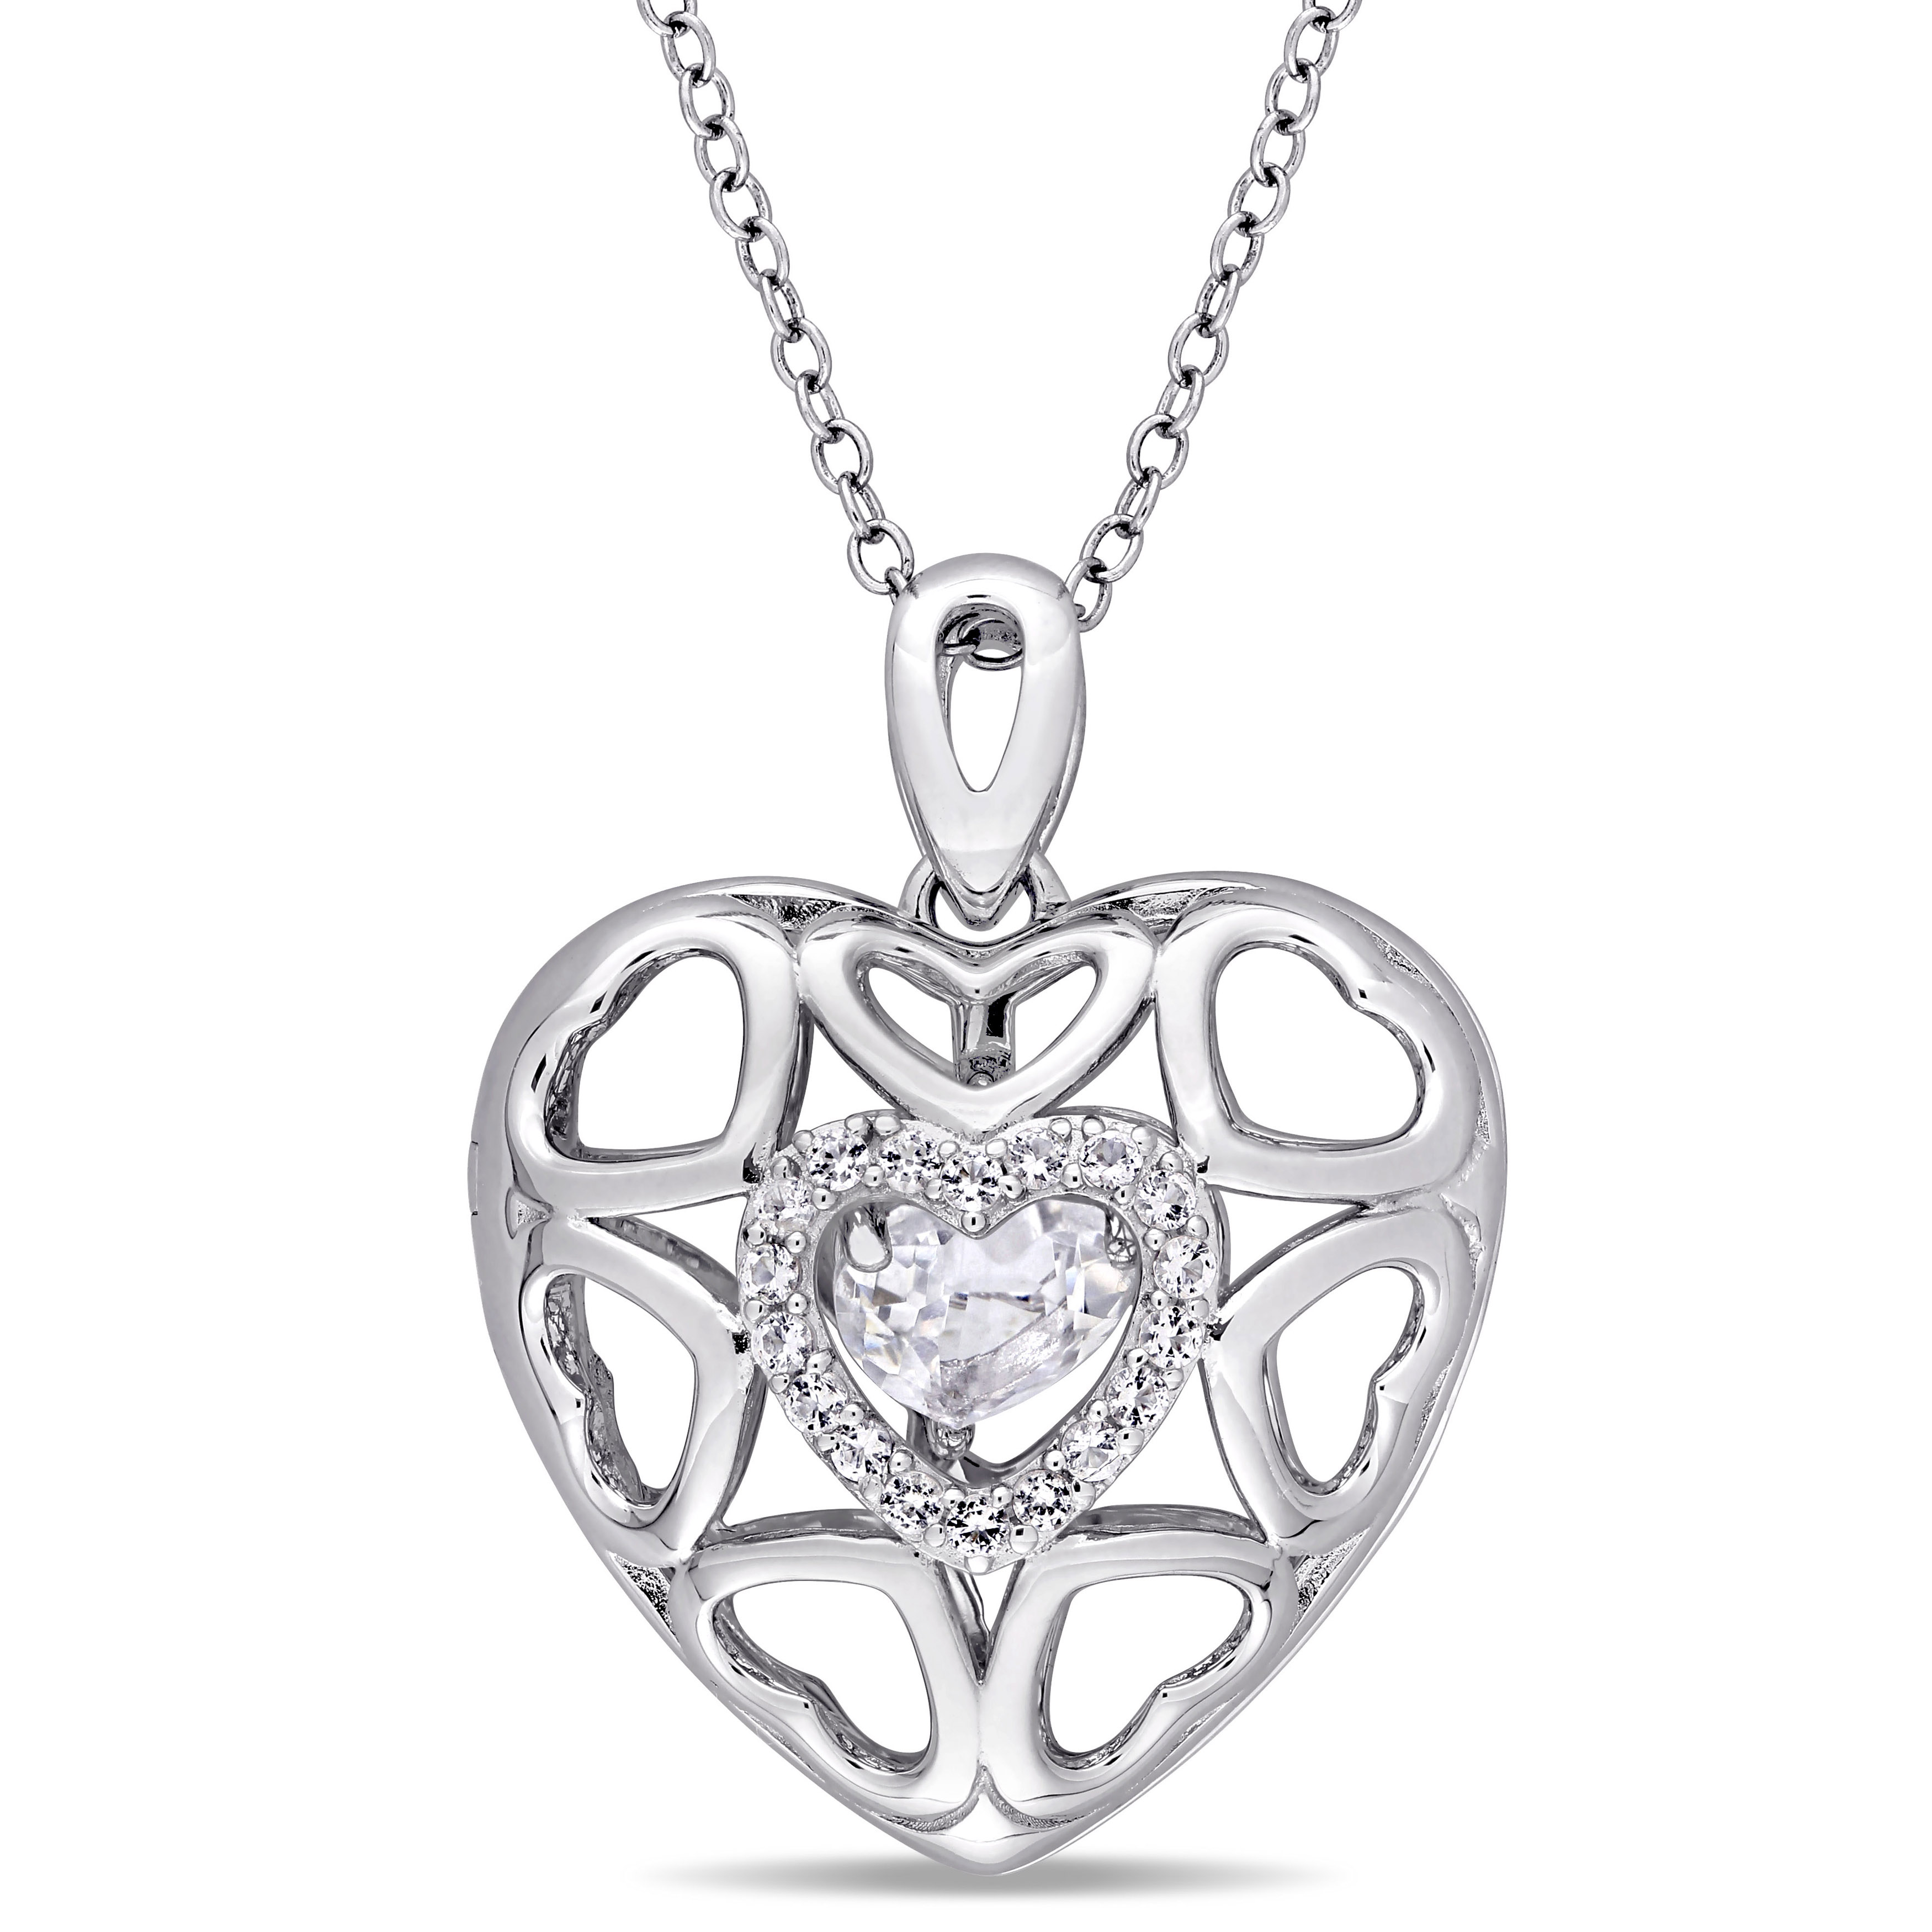 White Topaz Heart Locket Pendant with Floating White Topaz with Chain in Sterling Silver